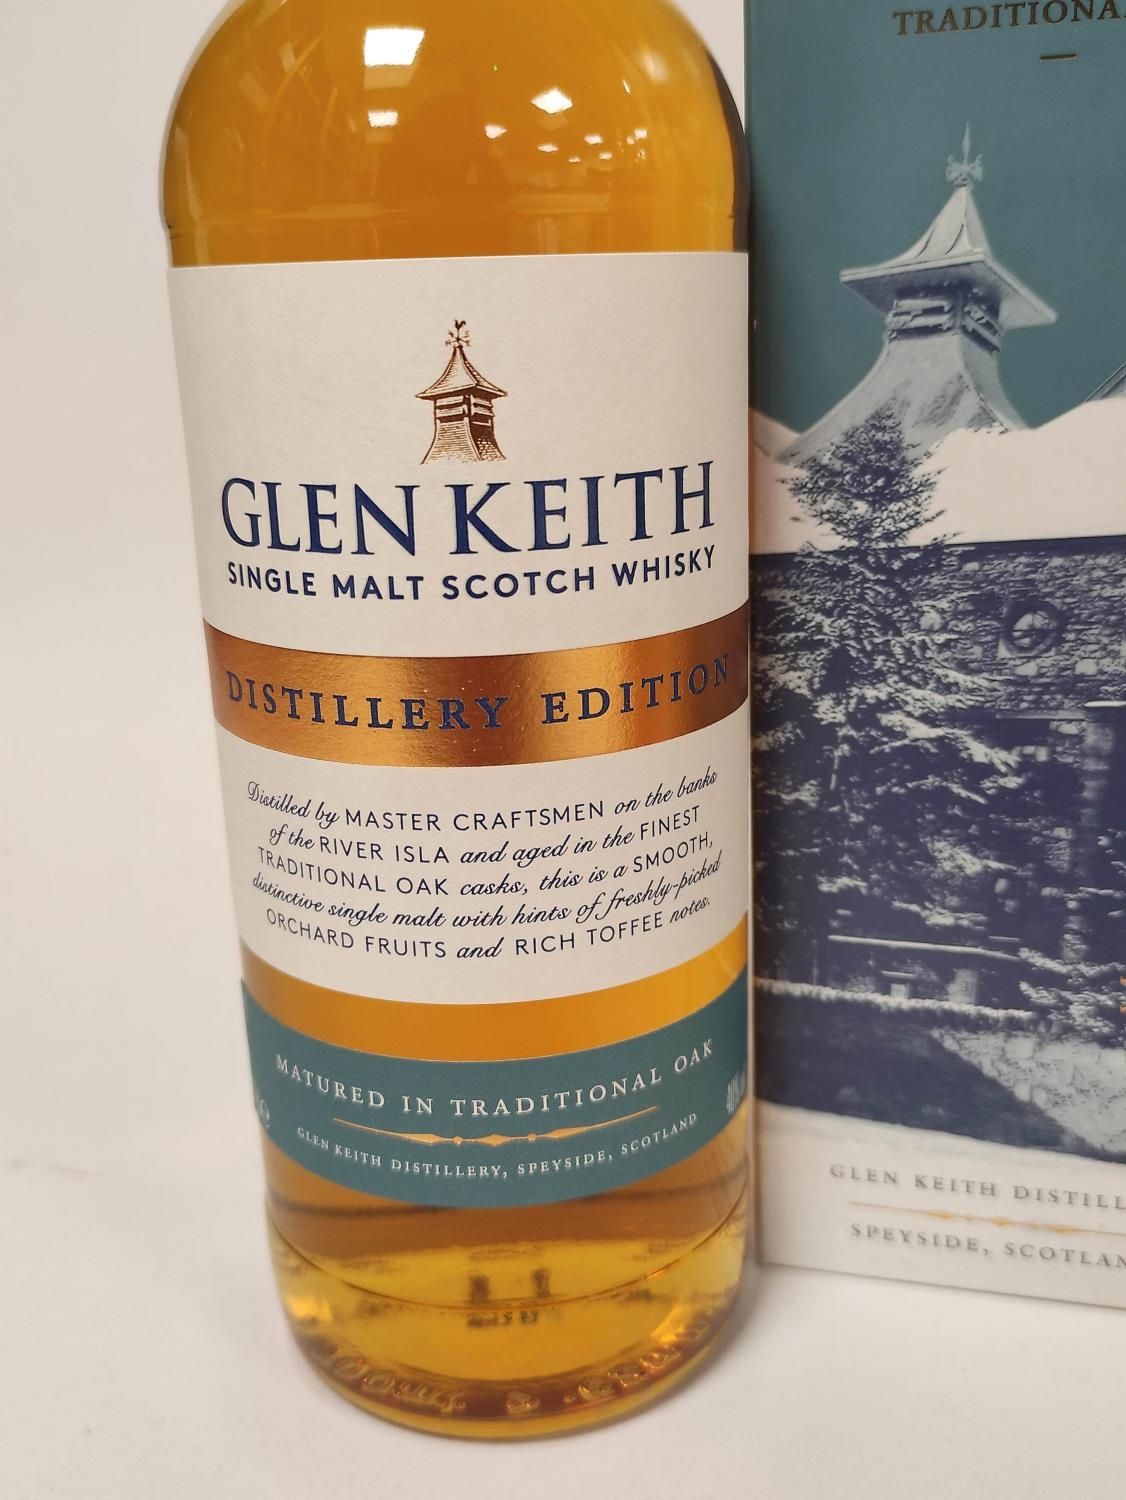 Glen Keith Distillery Edition single malt Scotch whisky, 70cl, 40% vol, boxed, with Cragganmore 12 - Image 6 of 7